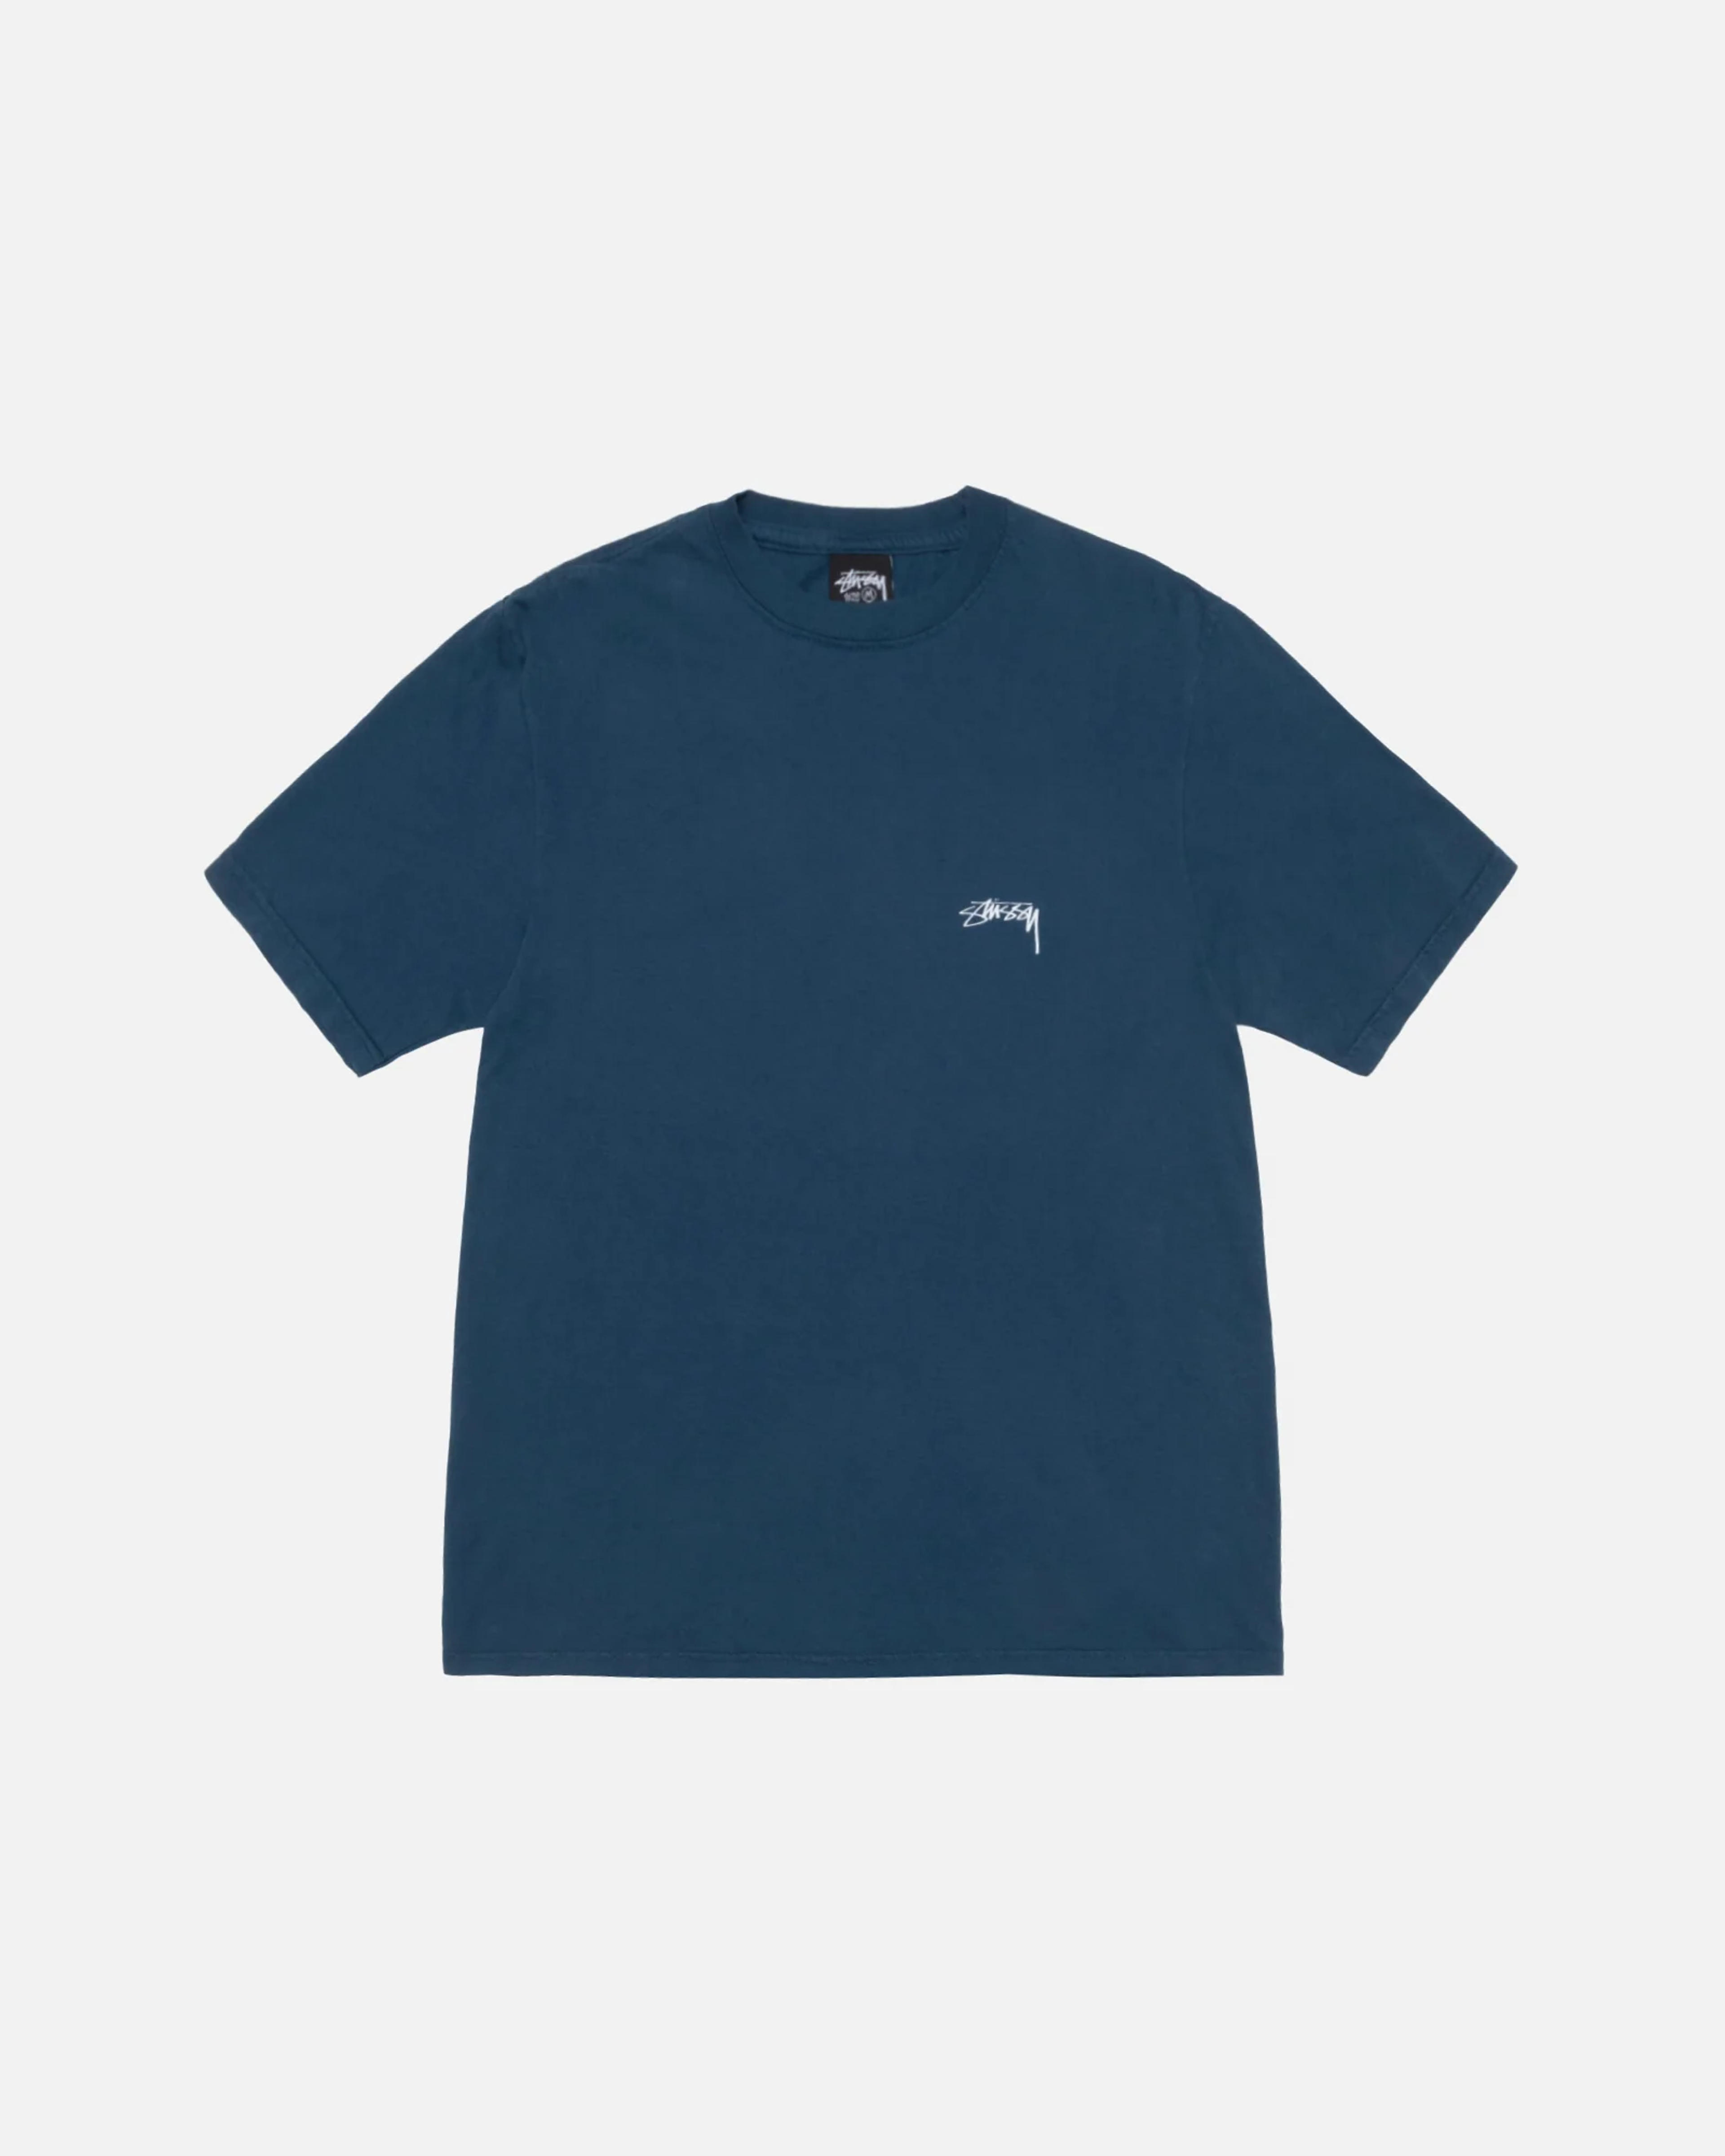 Smooth Stock Tee Pigment Dyed in navy